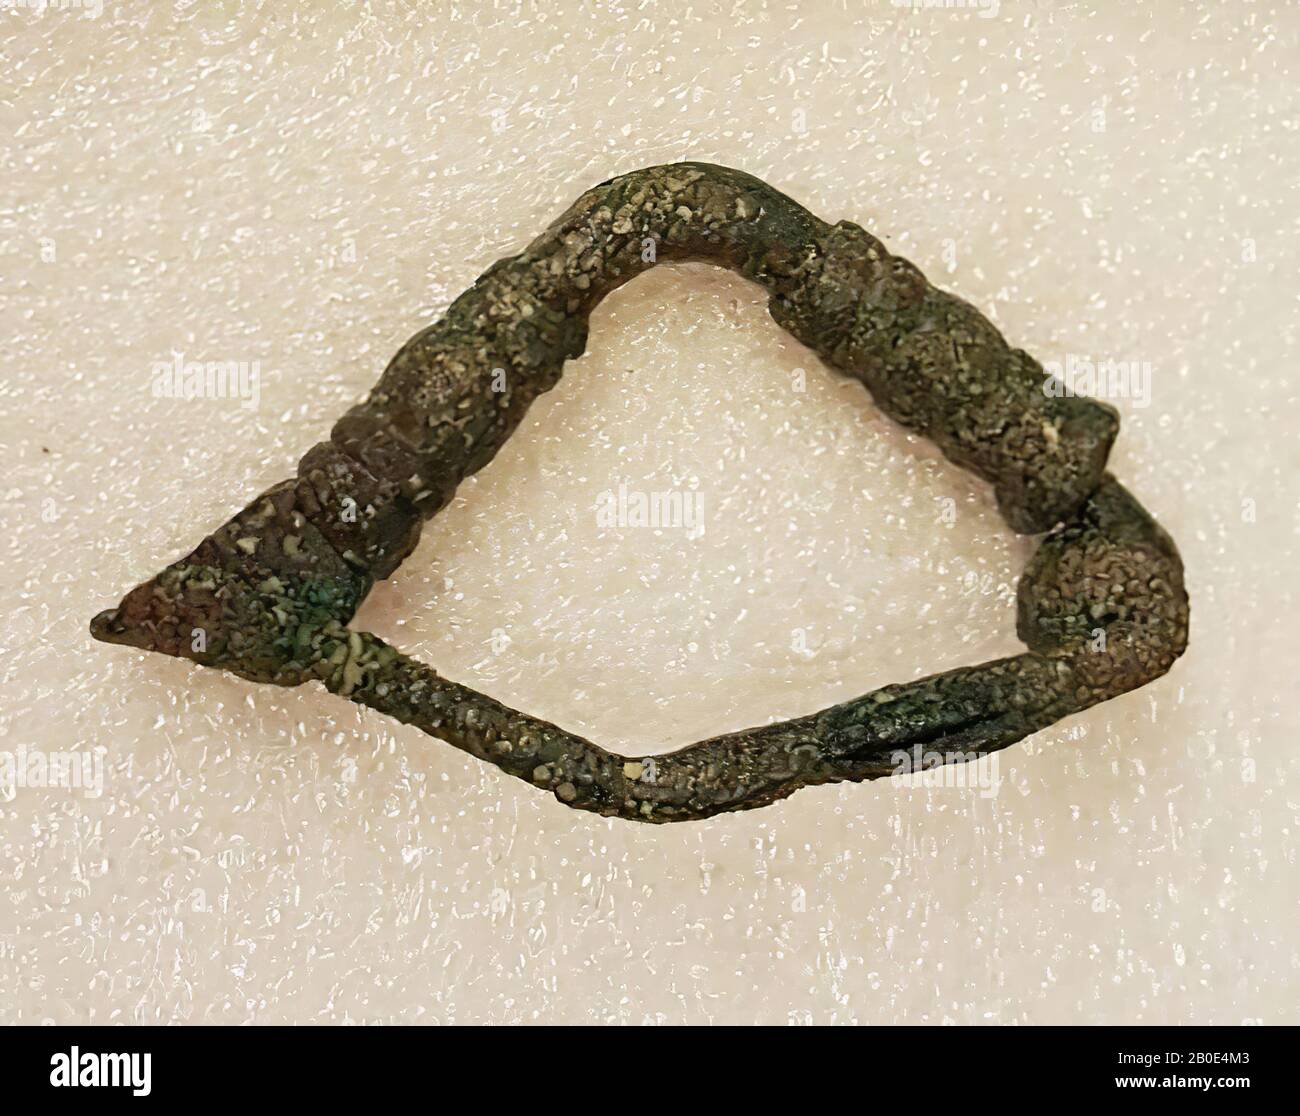 A bronze fibula. The arch is angled outwards in the middle. On both sides of the curve a broad and long thickening, over the width decorated with several grooves (diameter arc: 0.3 cm, thickenings: 0.6 cm). One end of the arch forms a locking hook. The hook consists of a flat part with the end bent round backwards and decorated along the length with four parallel grooves. The shape and decoration of the bow and hook are reminiscent of a hand and an arm decorated with bracelets. The other end of the arch is spirally bent and merges into an angled outwardly bent needle (diameter: 0.2 cm Stock Photo